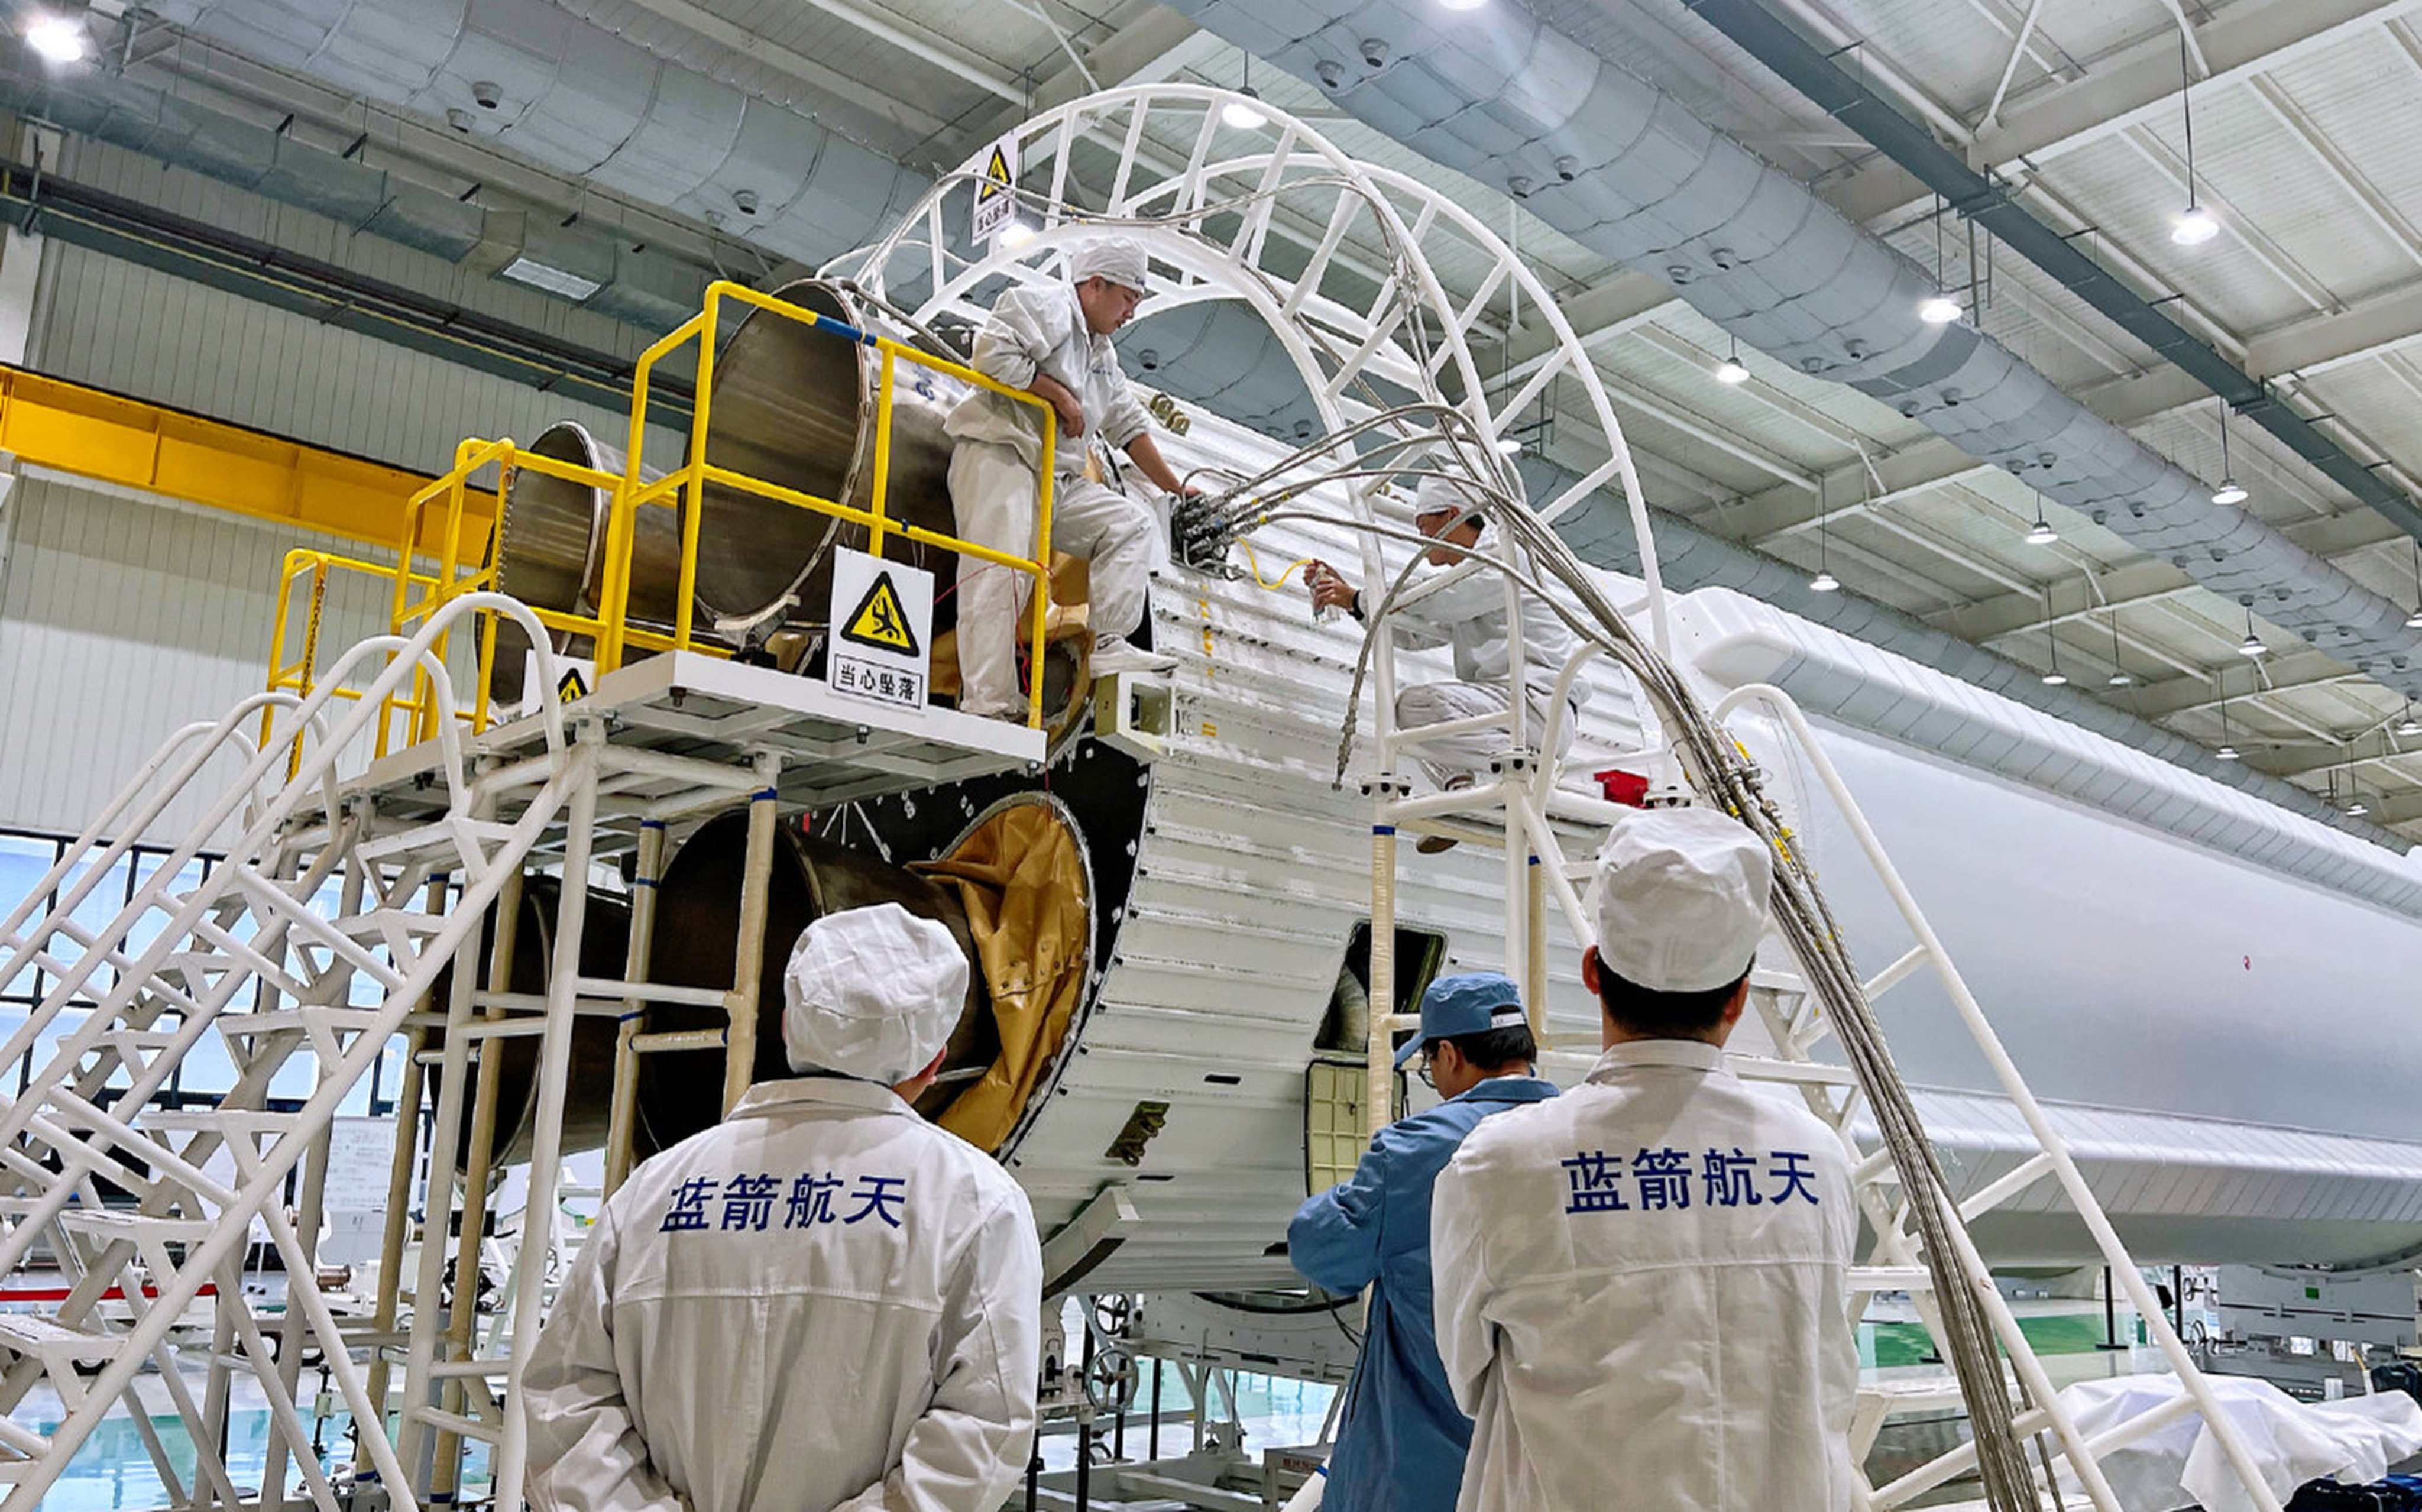 Chinese space start-up LandSpace said testing went as expected on a propellant tank, understood to be for an enhanced model of its world-beating methane-fuelled Zhuque-2 rocket​​​. Photo: Weibo